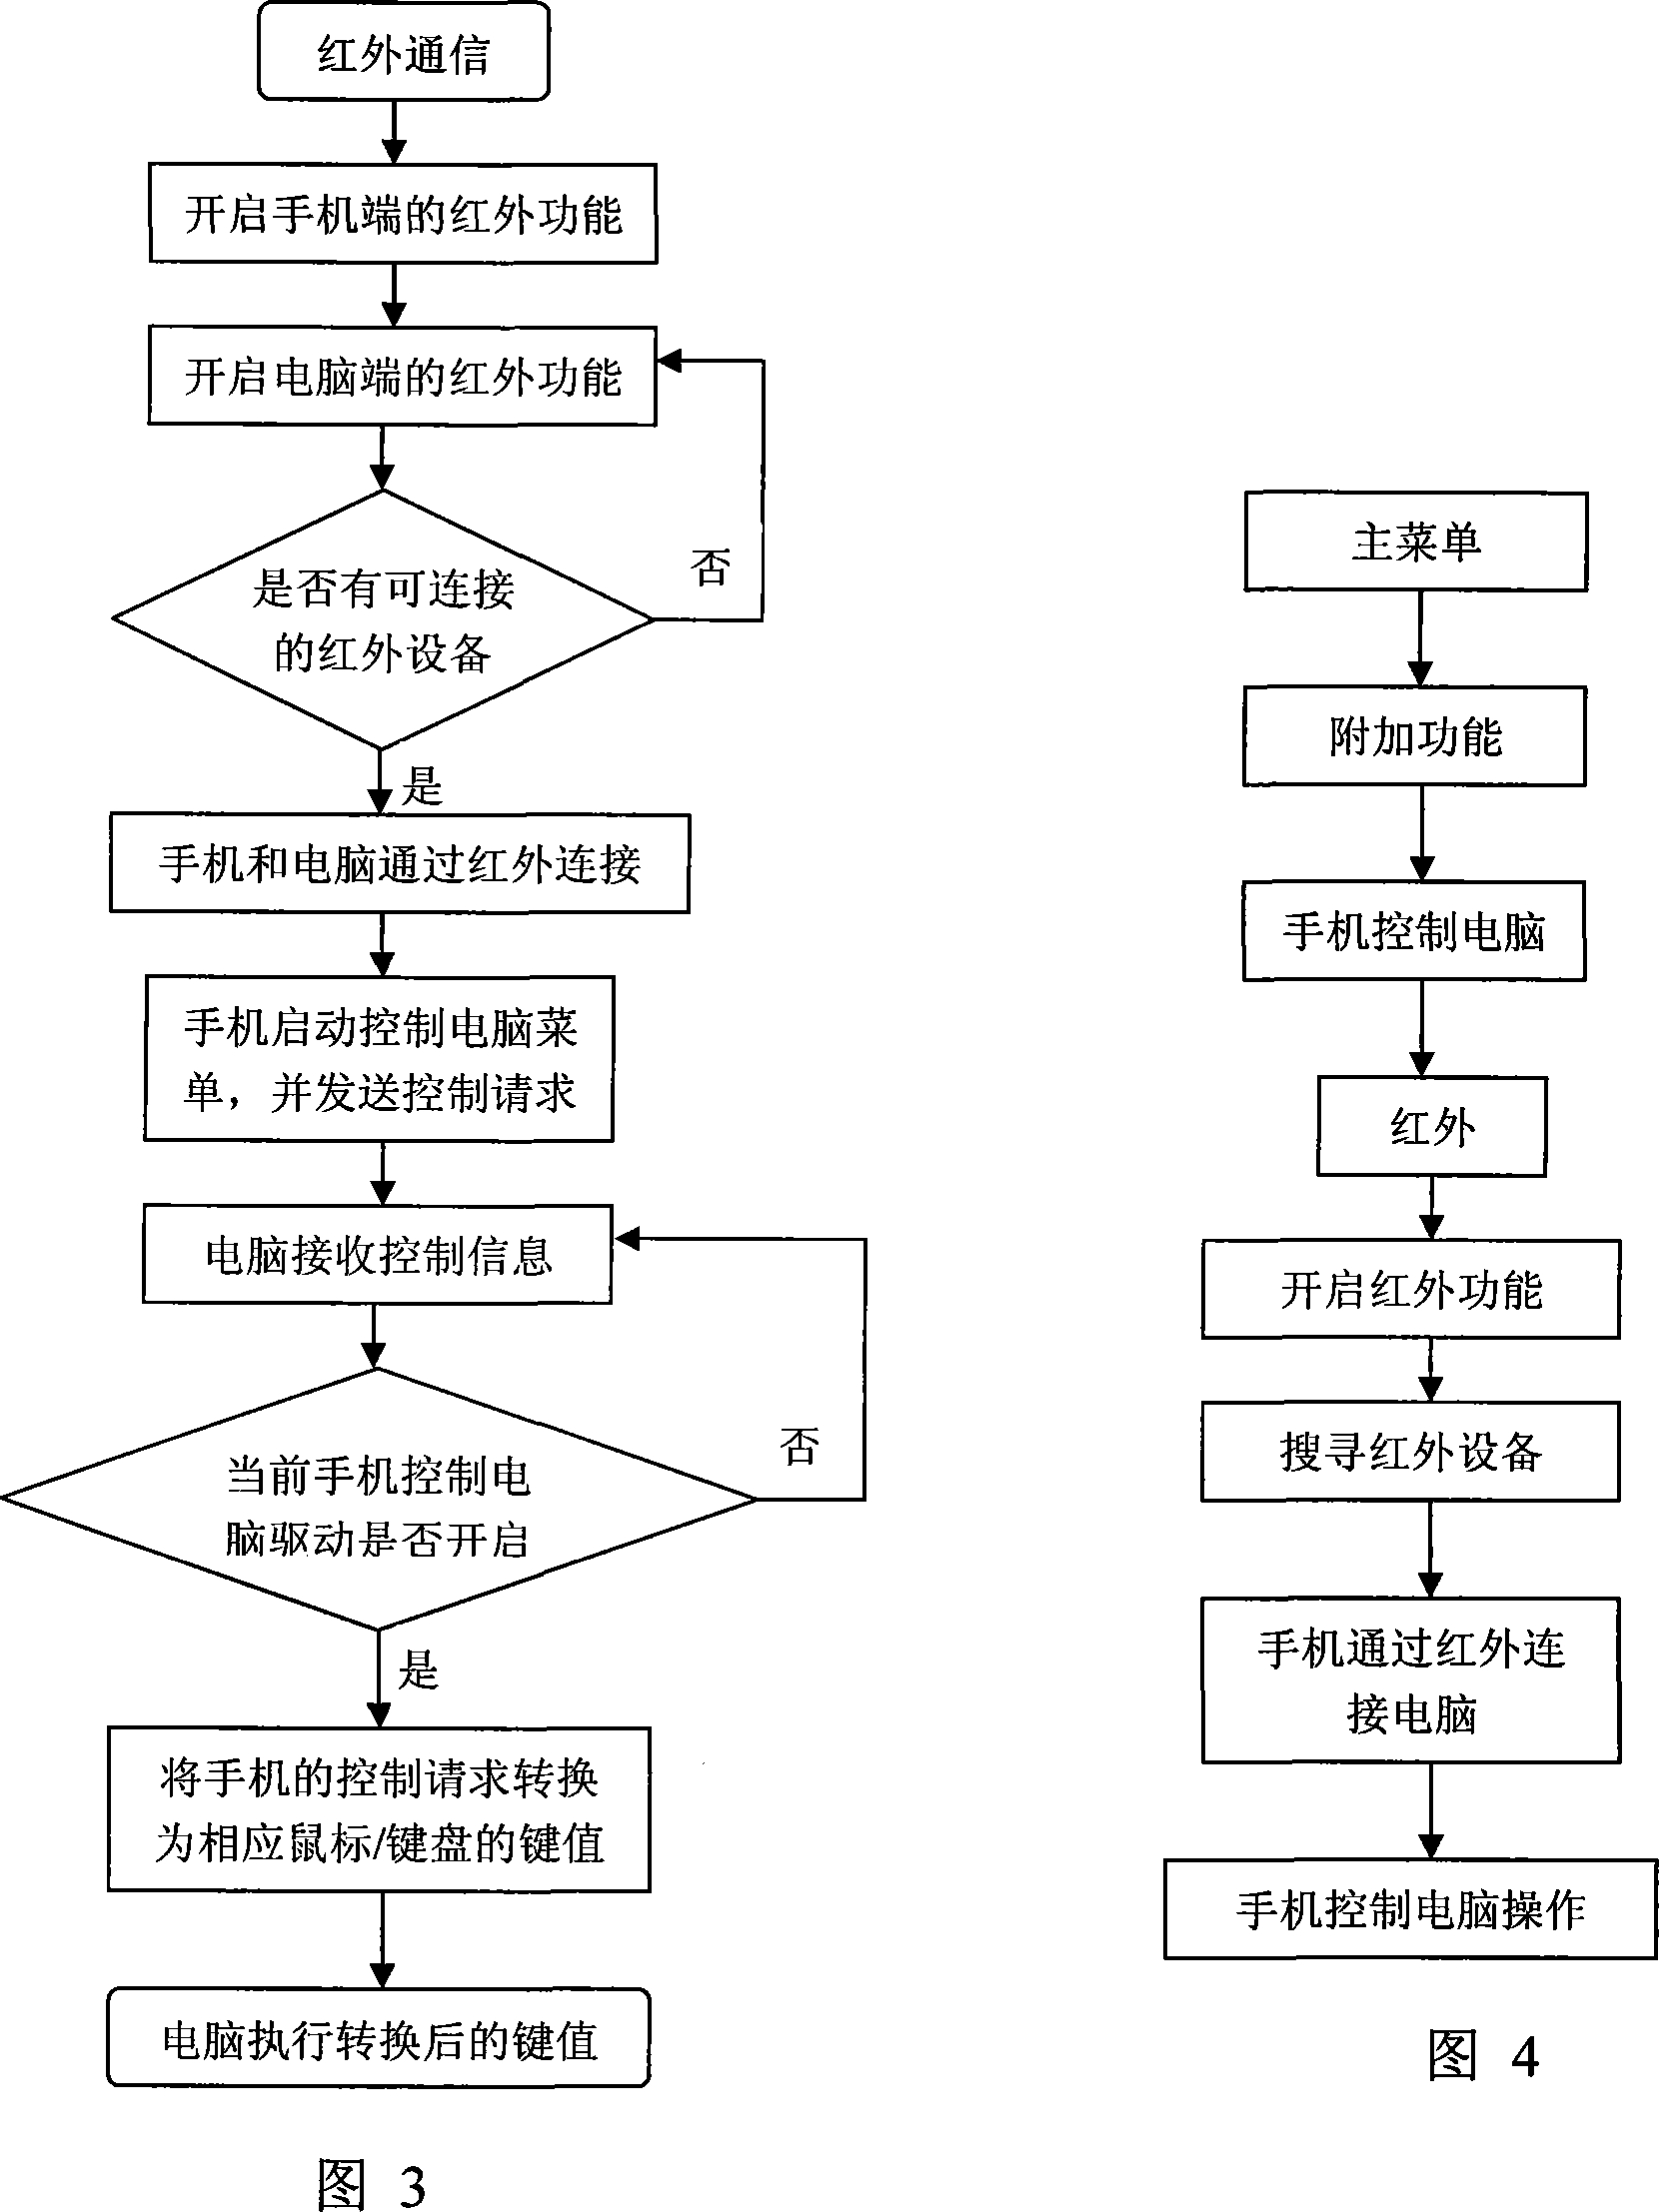 Method for controlling computer by mobile phones